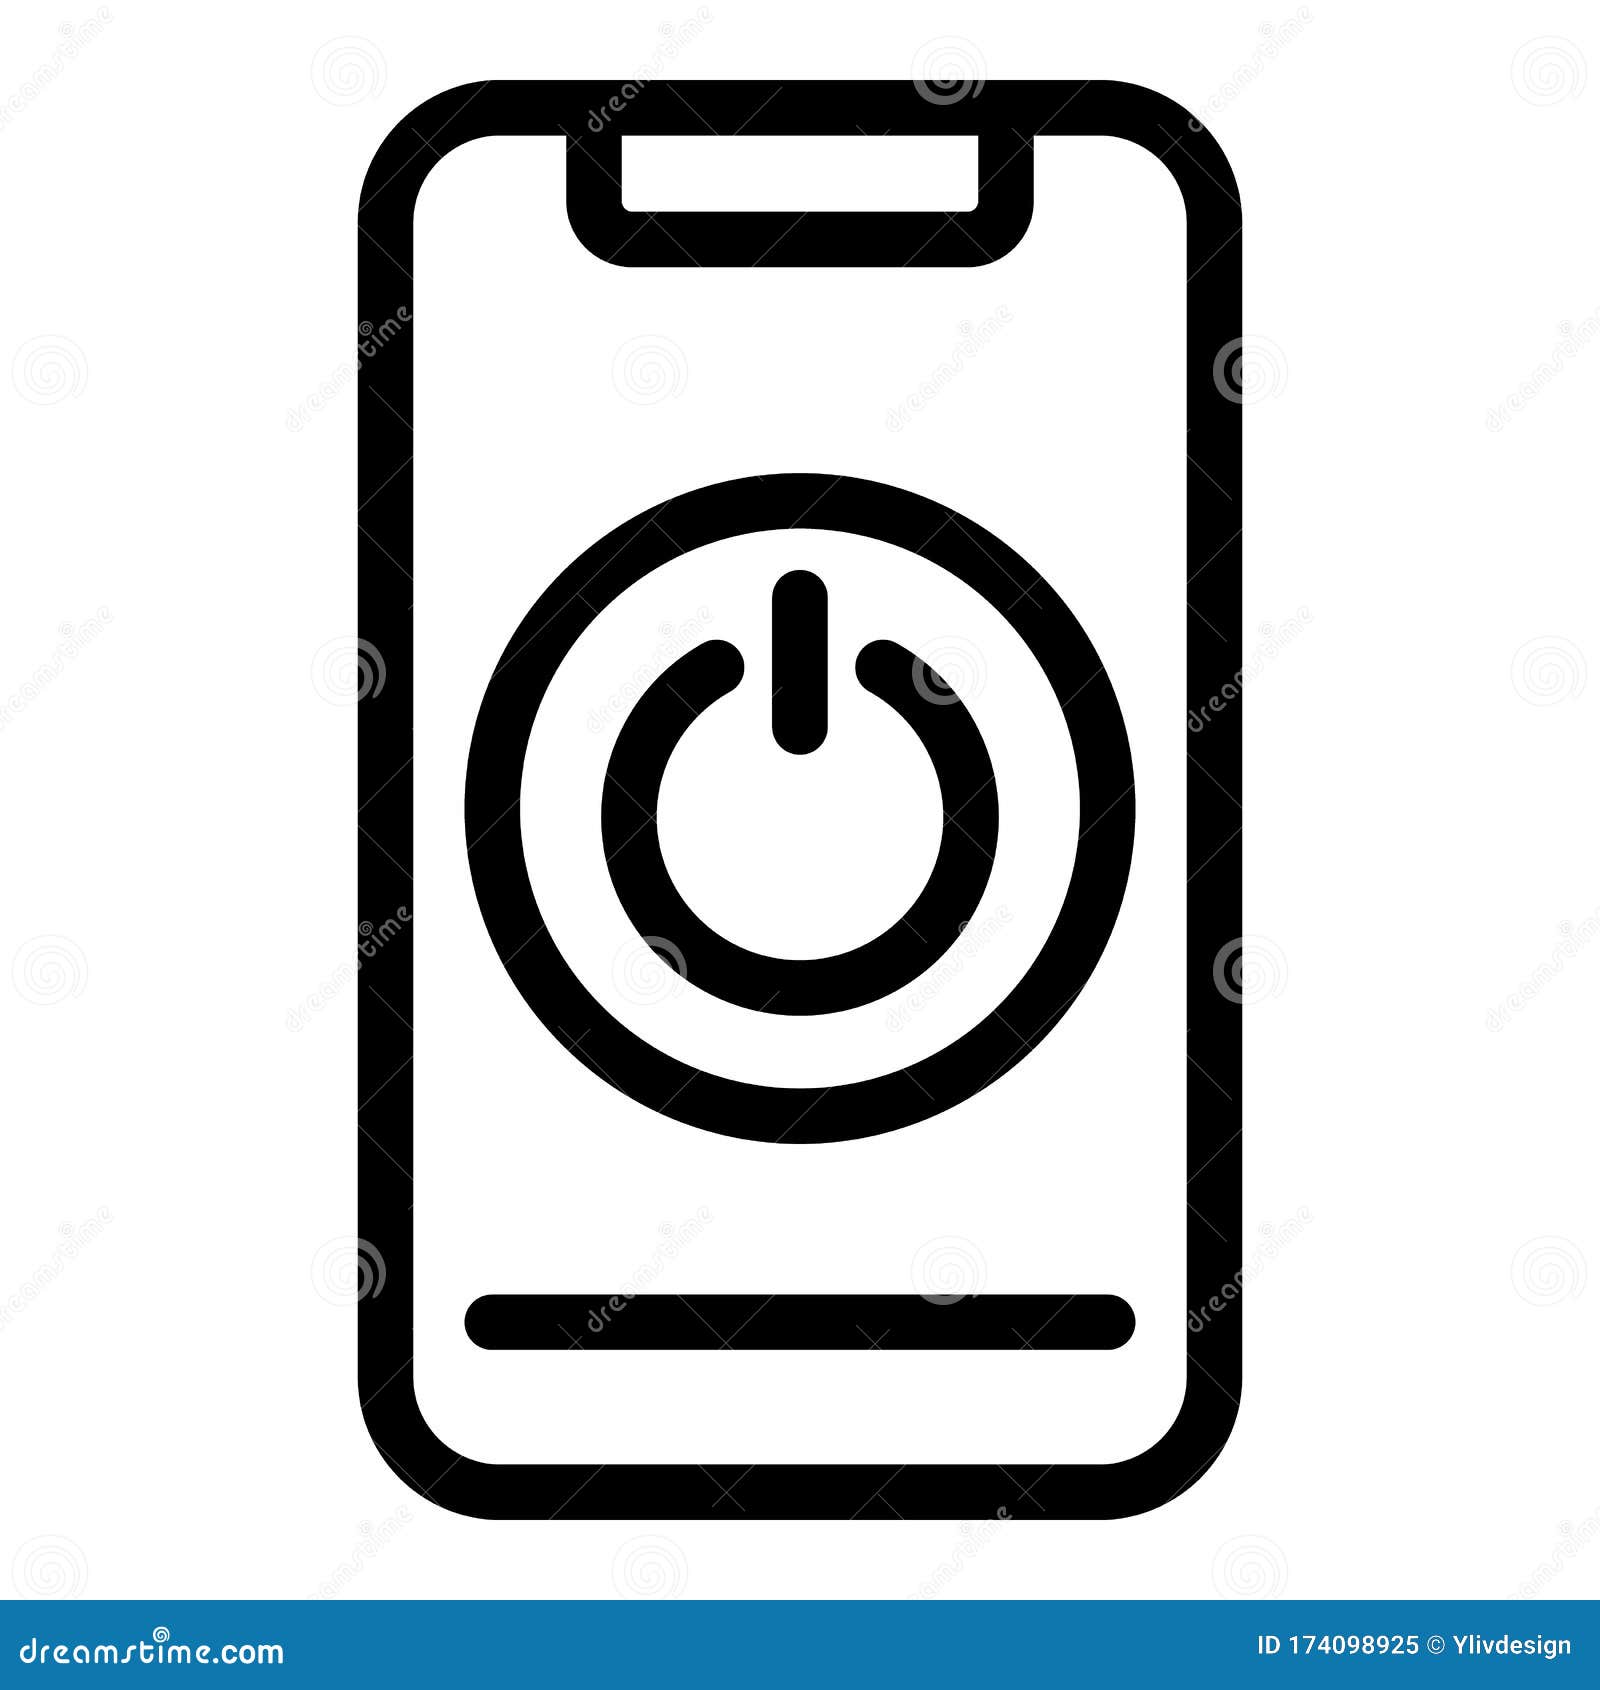 smartphone and power button icon, outline style